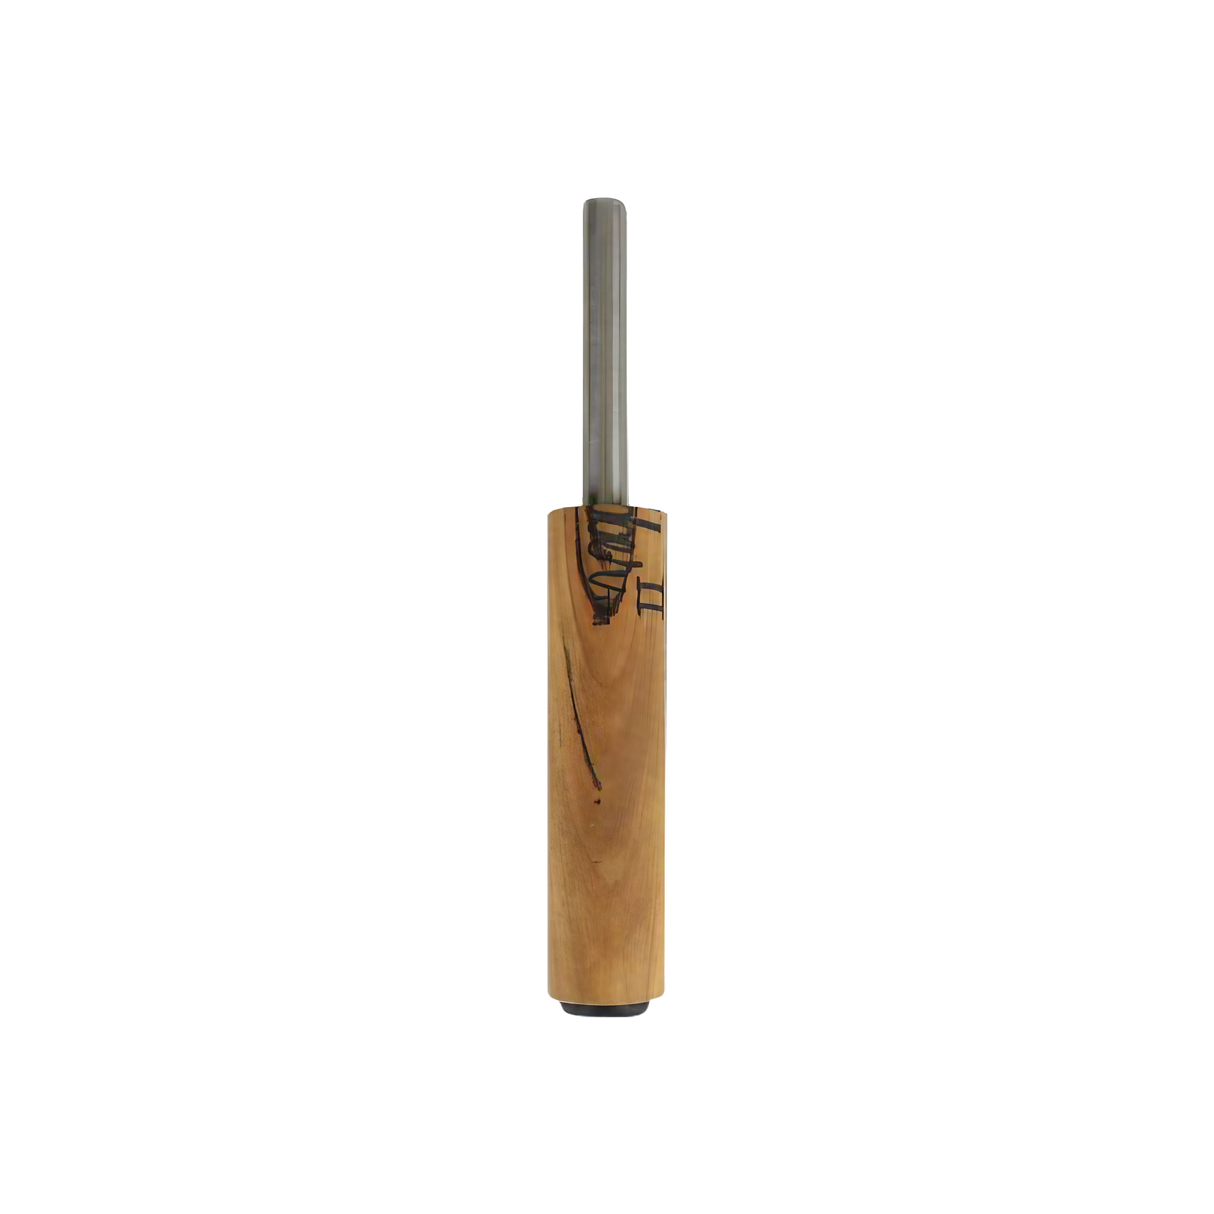 Honey Dabber II Vapor Straw Collector, 5" Titanium tip, Wooden body, for concentrates - Side View